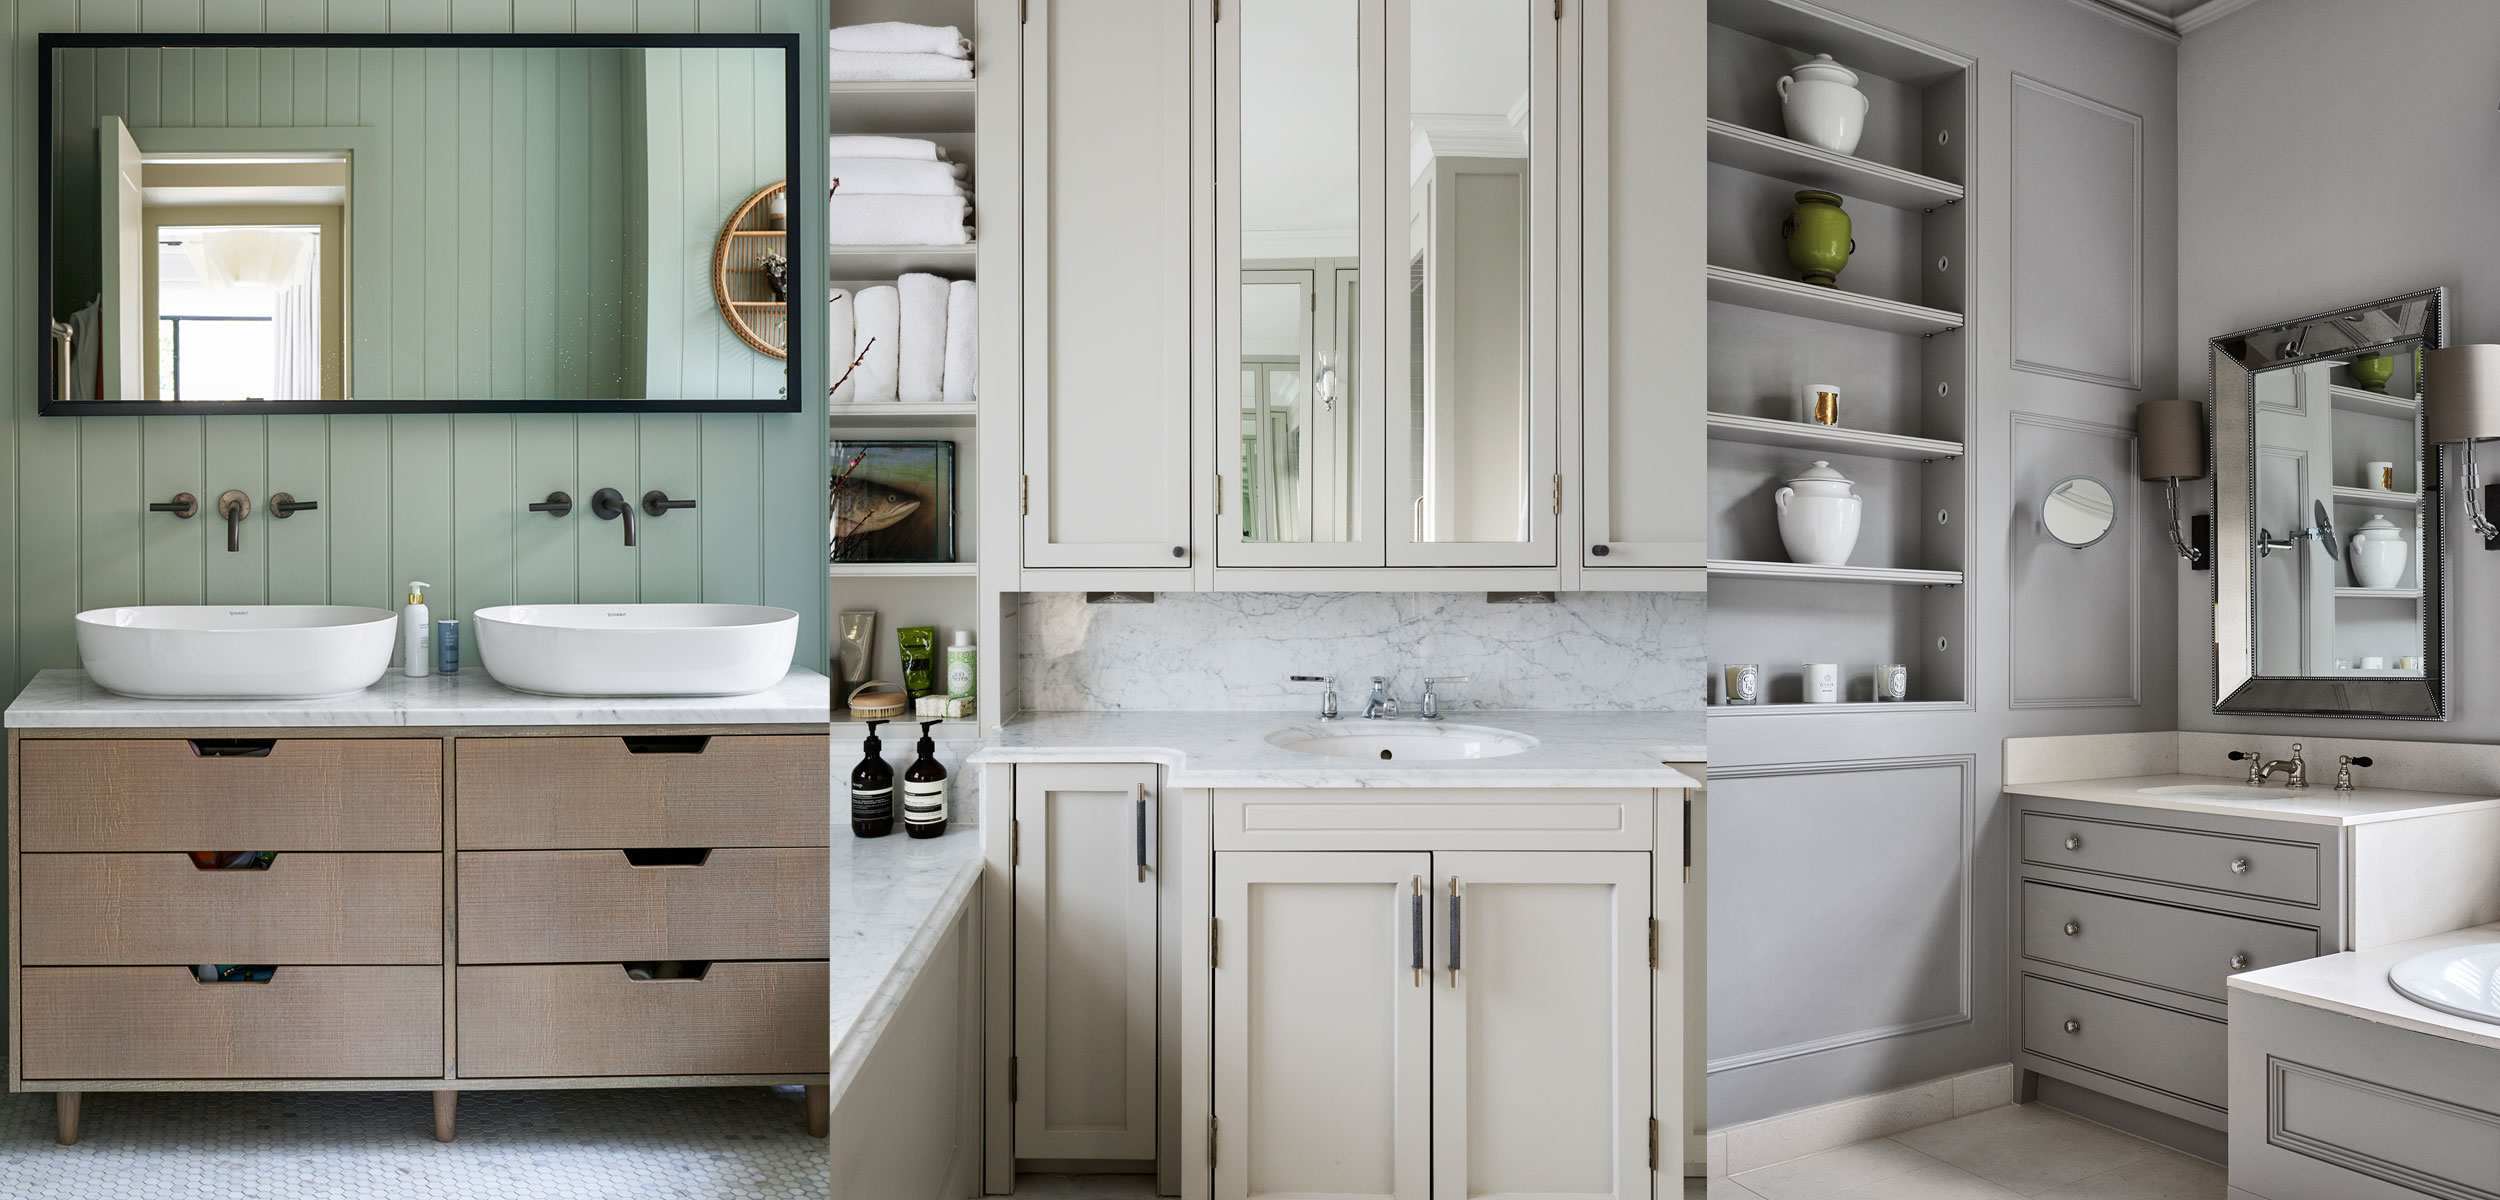 10 Best Bathroom Cabinet Organizers On , According To Experts